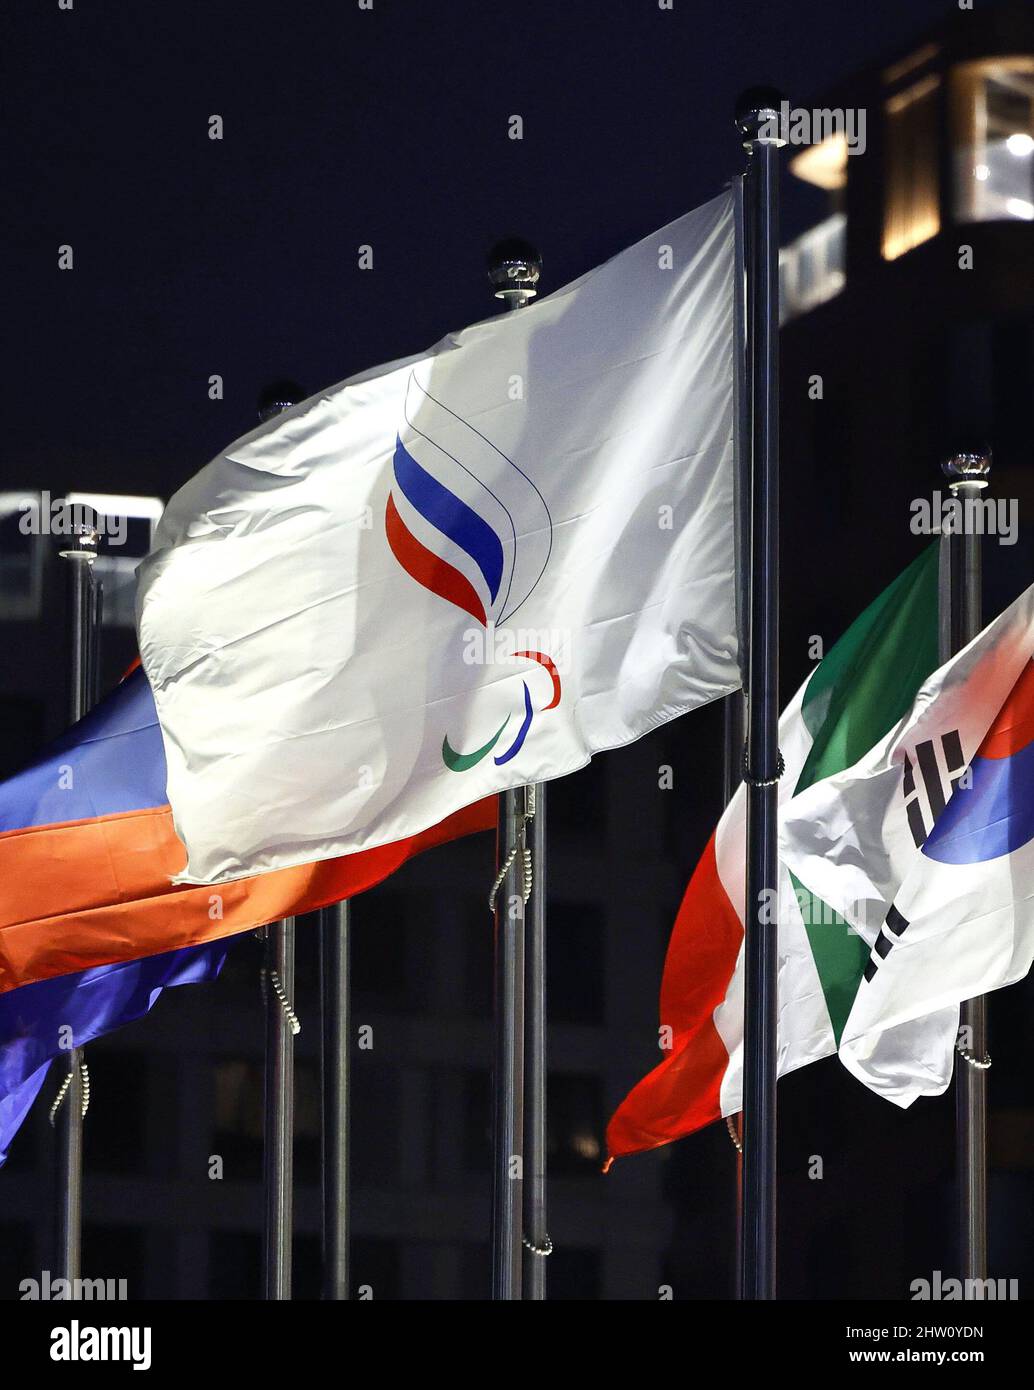 Photo taken on March 3, 2022, shows the flag of the Russian Paralympic Committee (C) at the athletes' village for the Beijing Winter Paralympics in Beijing on the eve of its opening ceremony. The International Paralympic Committee decided the same day to ban athletes from Russia and Belarus from the Beijing Games, reversing its governing board's decision from the previous day that would have allowed them to compete as neutrals. (Kyodo)==Kyodo  Photo via Newscom Stock Photo